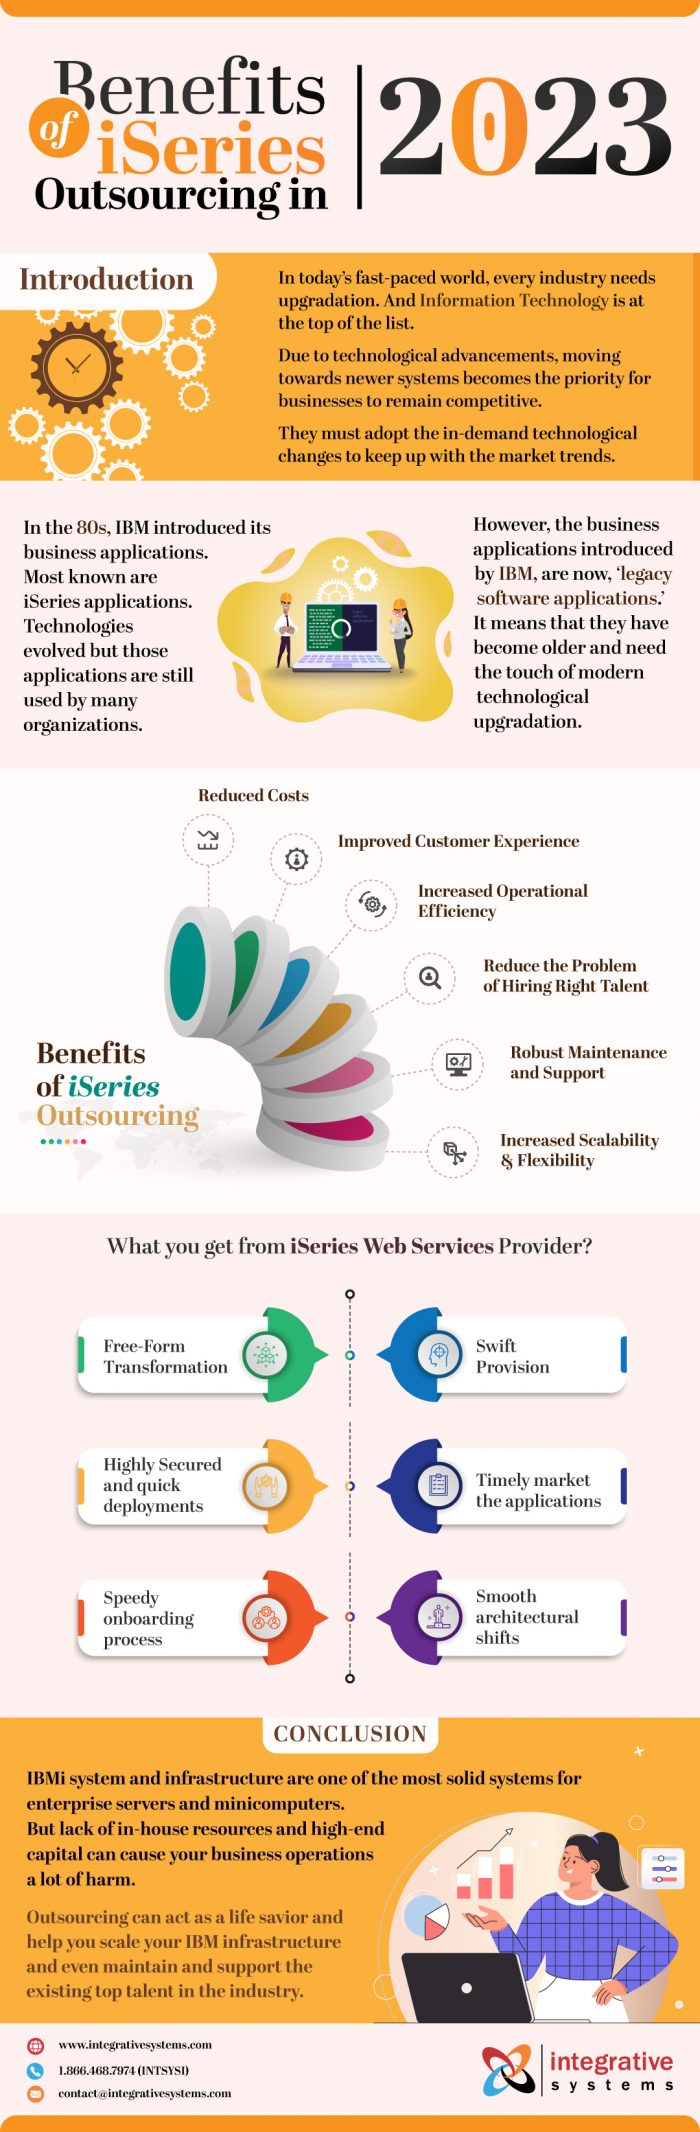 Benefits of iSeries Outsourcing in 2023